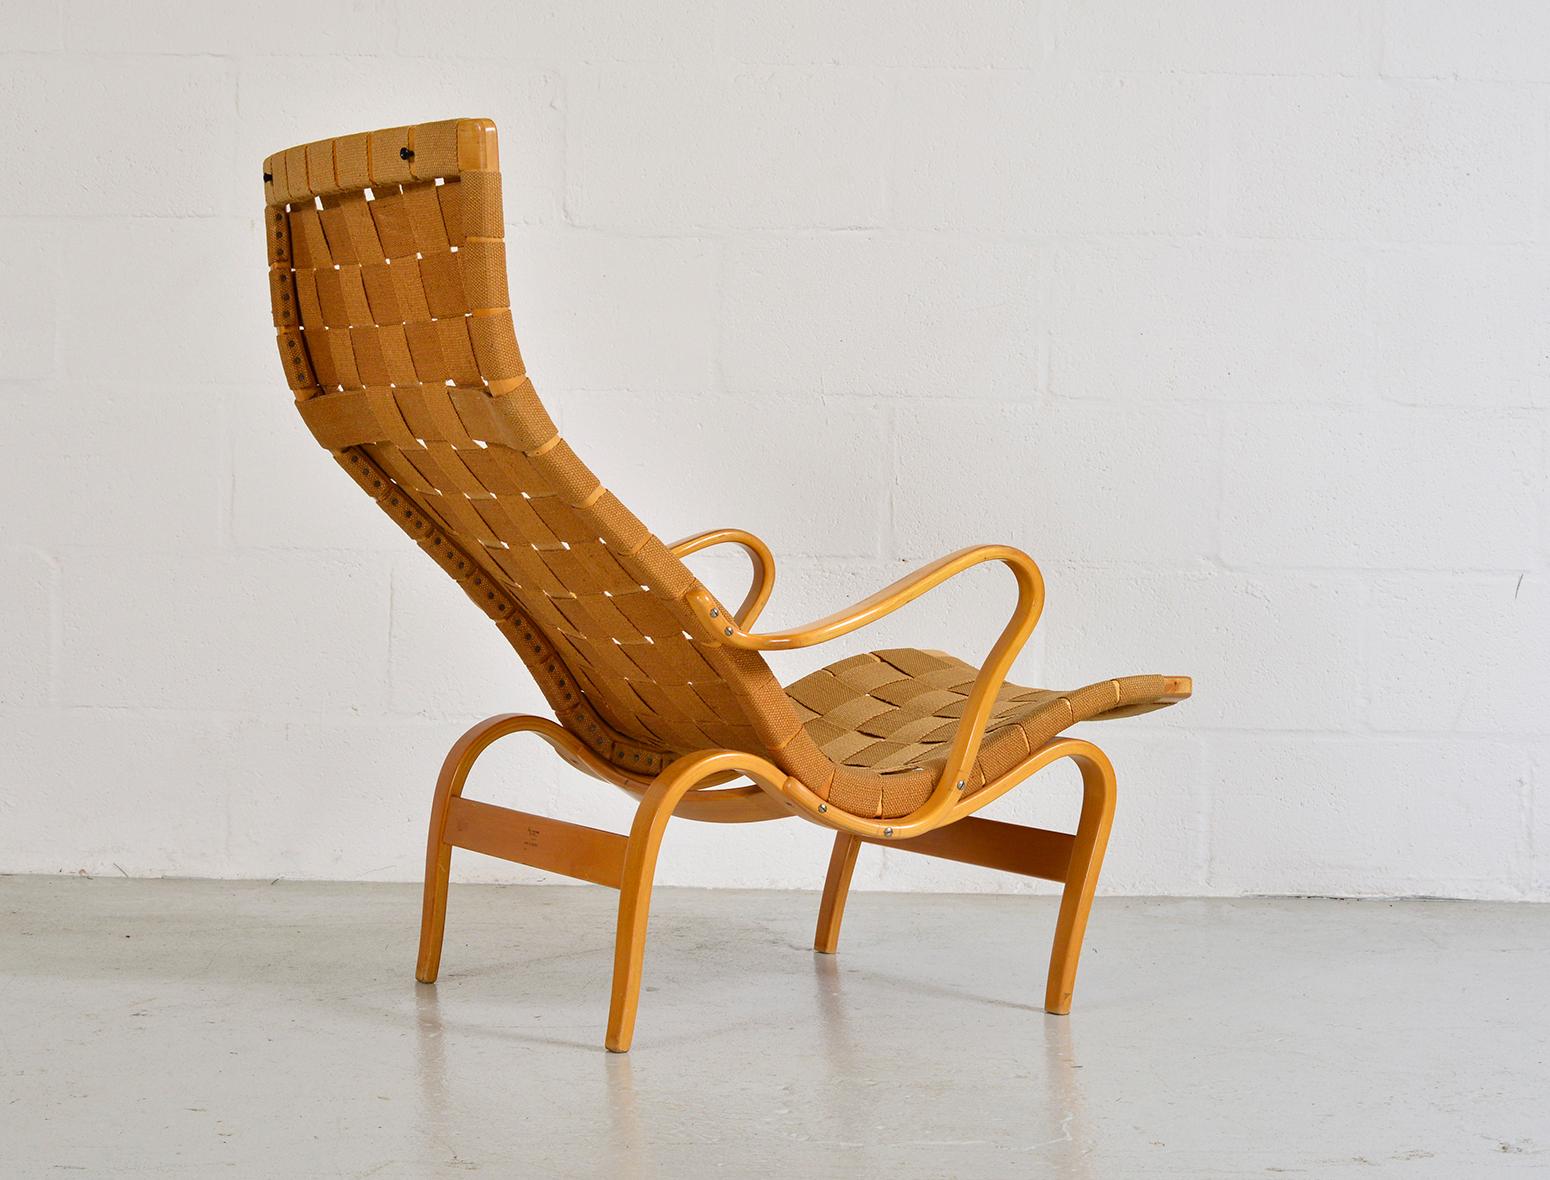 This startlingly organic easy chair model Pernilla, was designed by Bruno Mathsson and produced by Karl Mathsson AB in Värnamo, Sweden. The seating surface consists of woven webbing slung between a frame of steam-bent beech. The frame is stamped